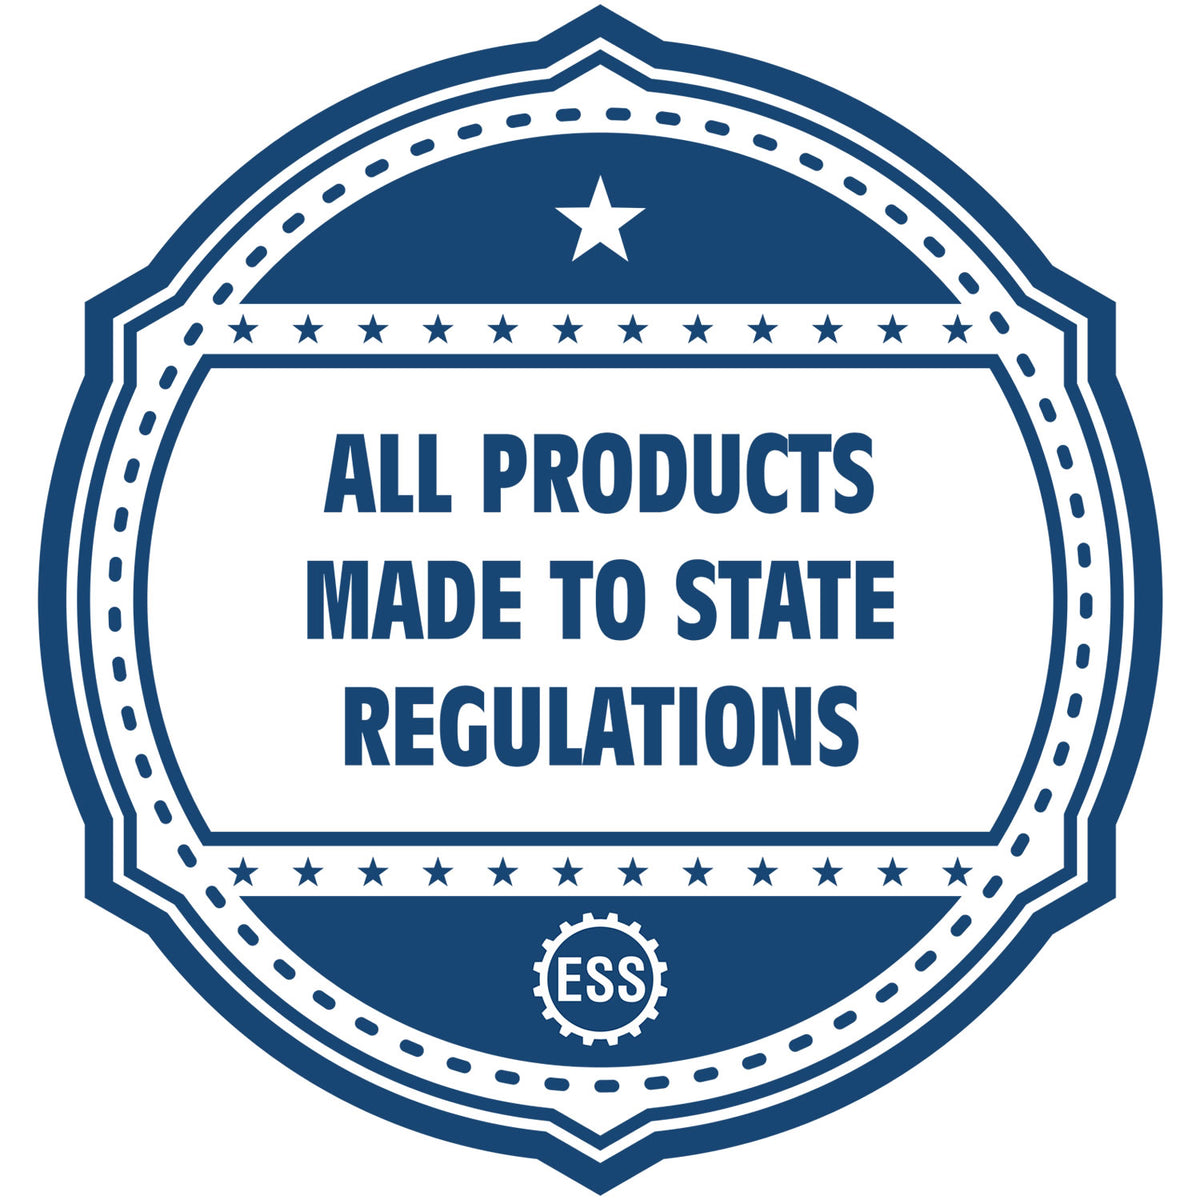 A blue icon or badge for the South Carolina Professional Geologist Seal Stamp showing that this product is made in compliance with state regulations.